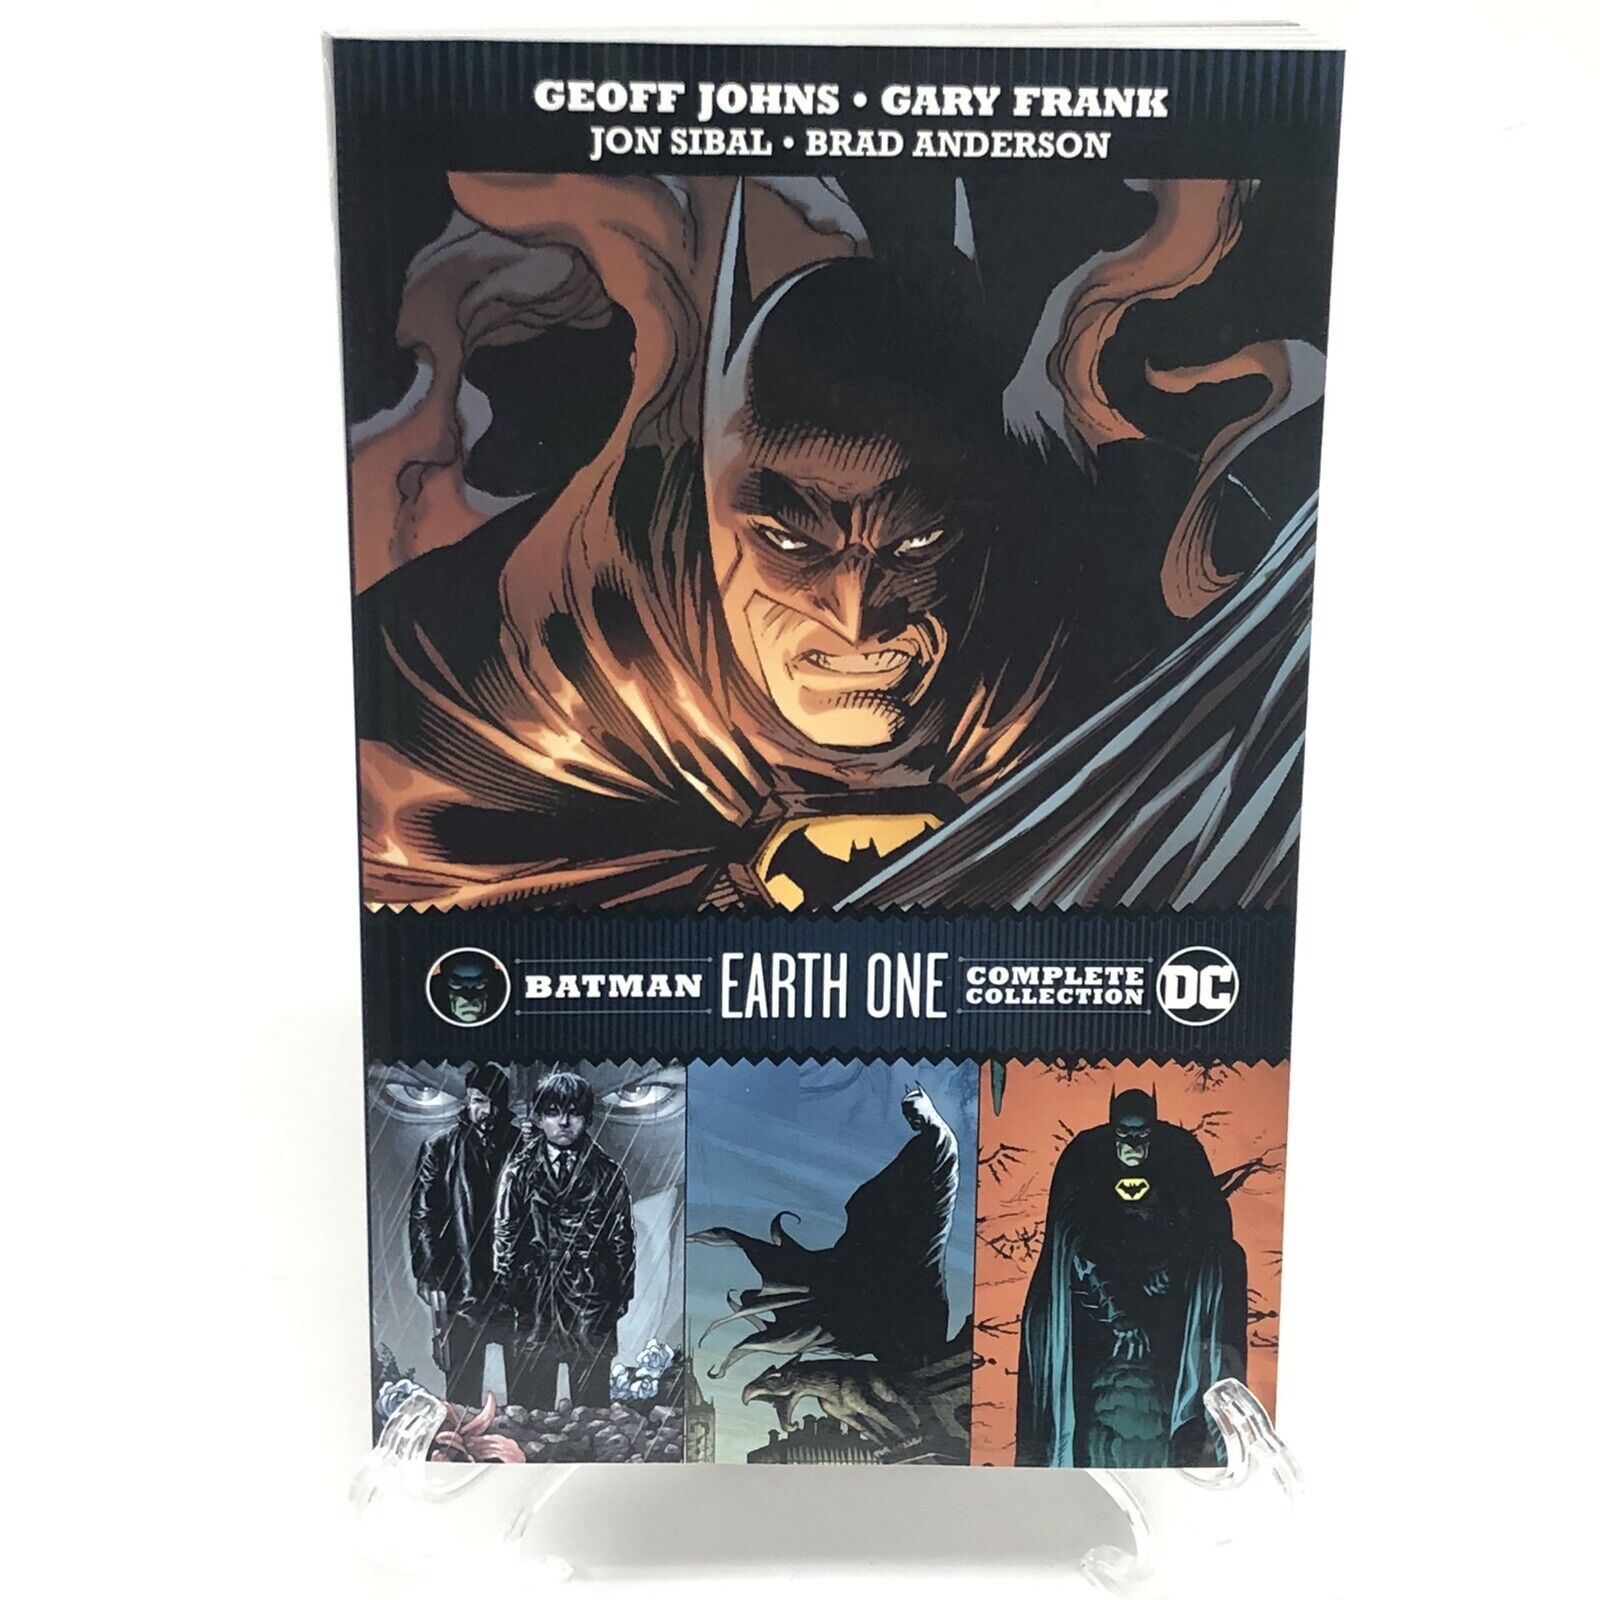 Batman Earth One Complete Collection #1-3 New DC Comics TPB Paperback